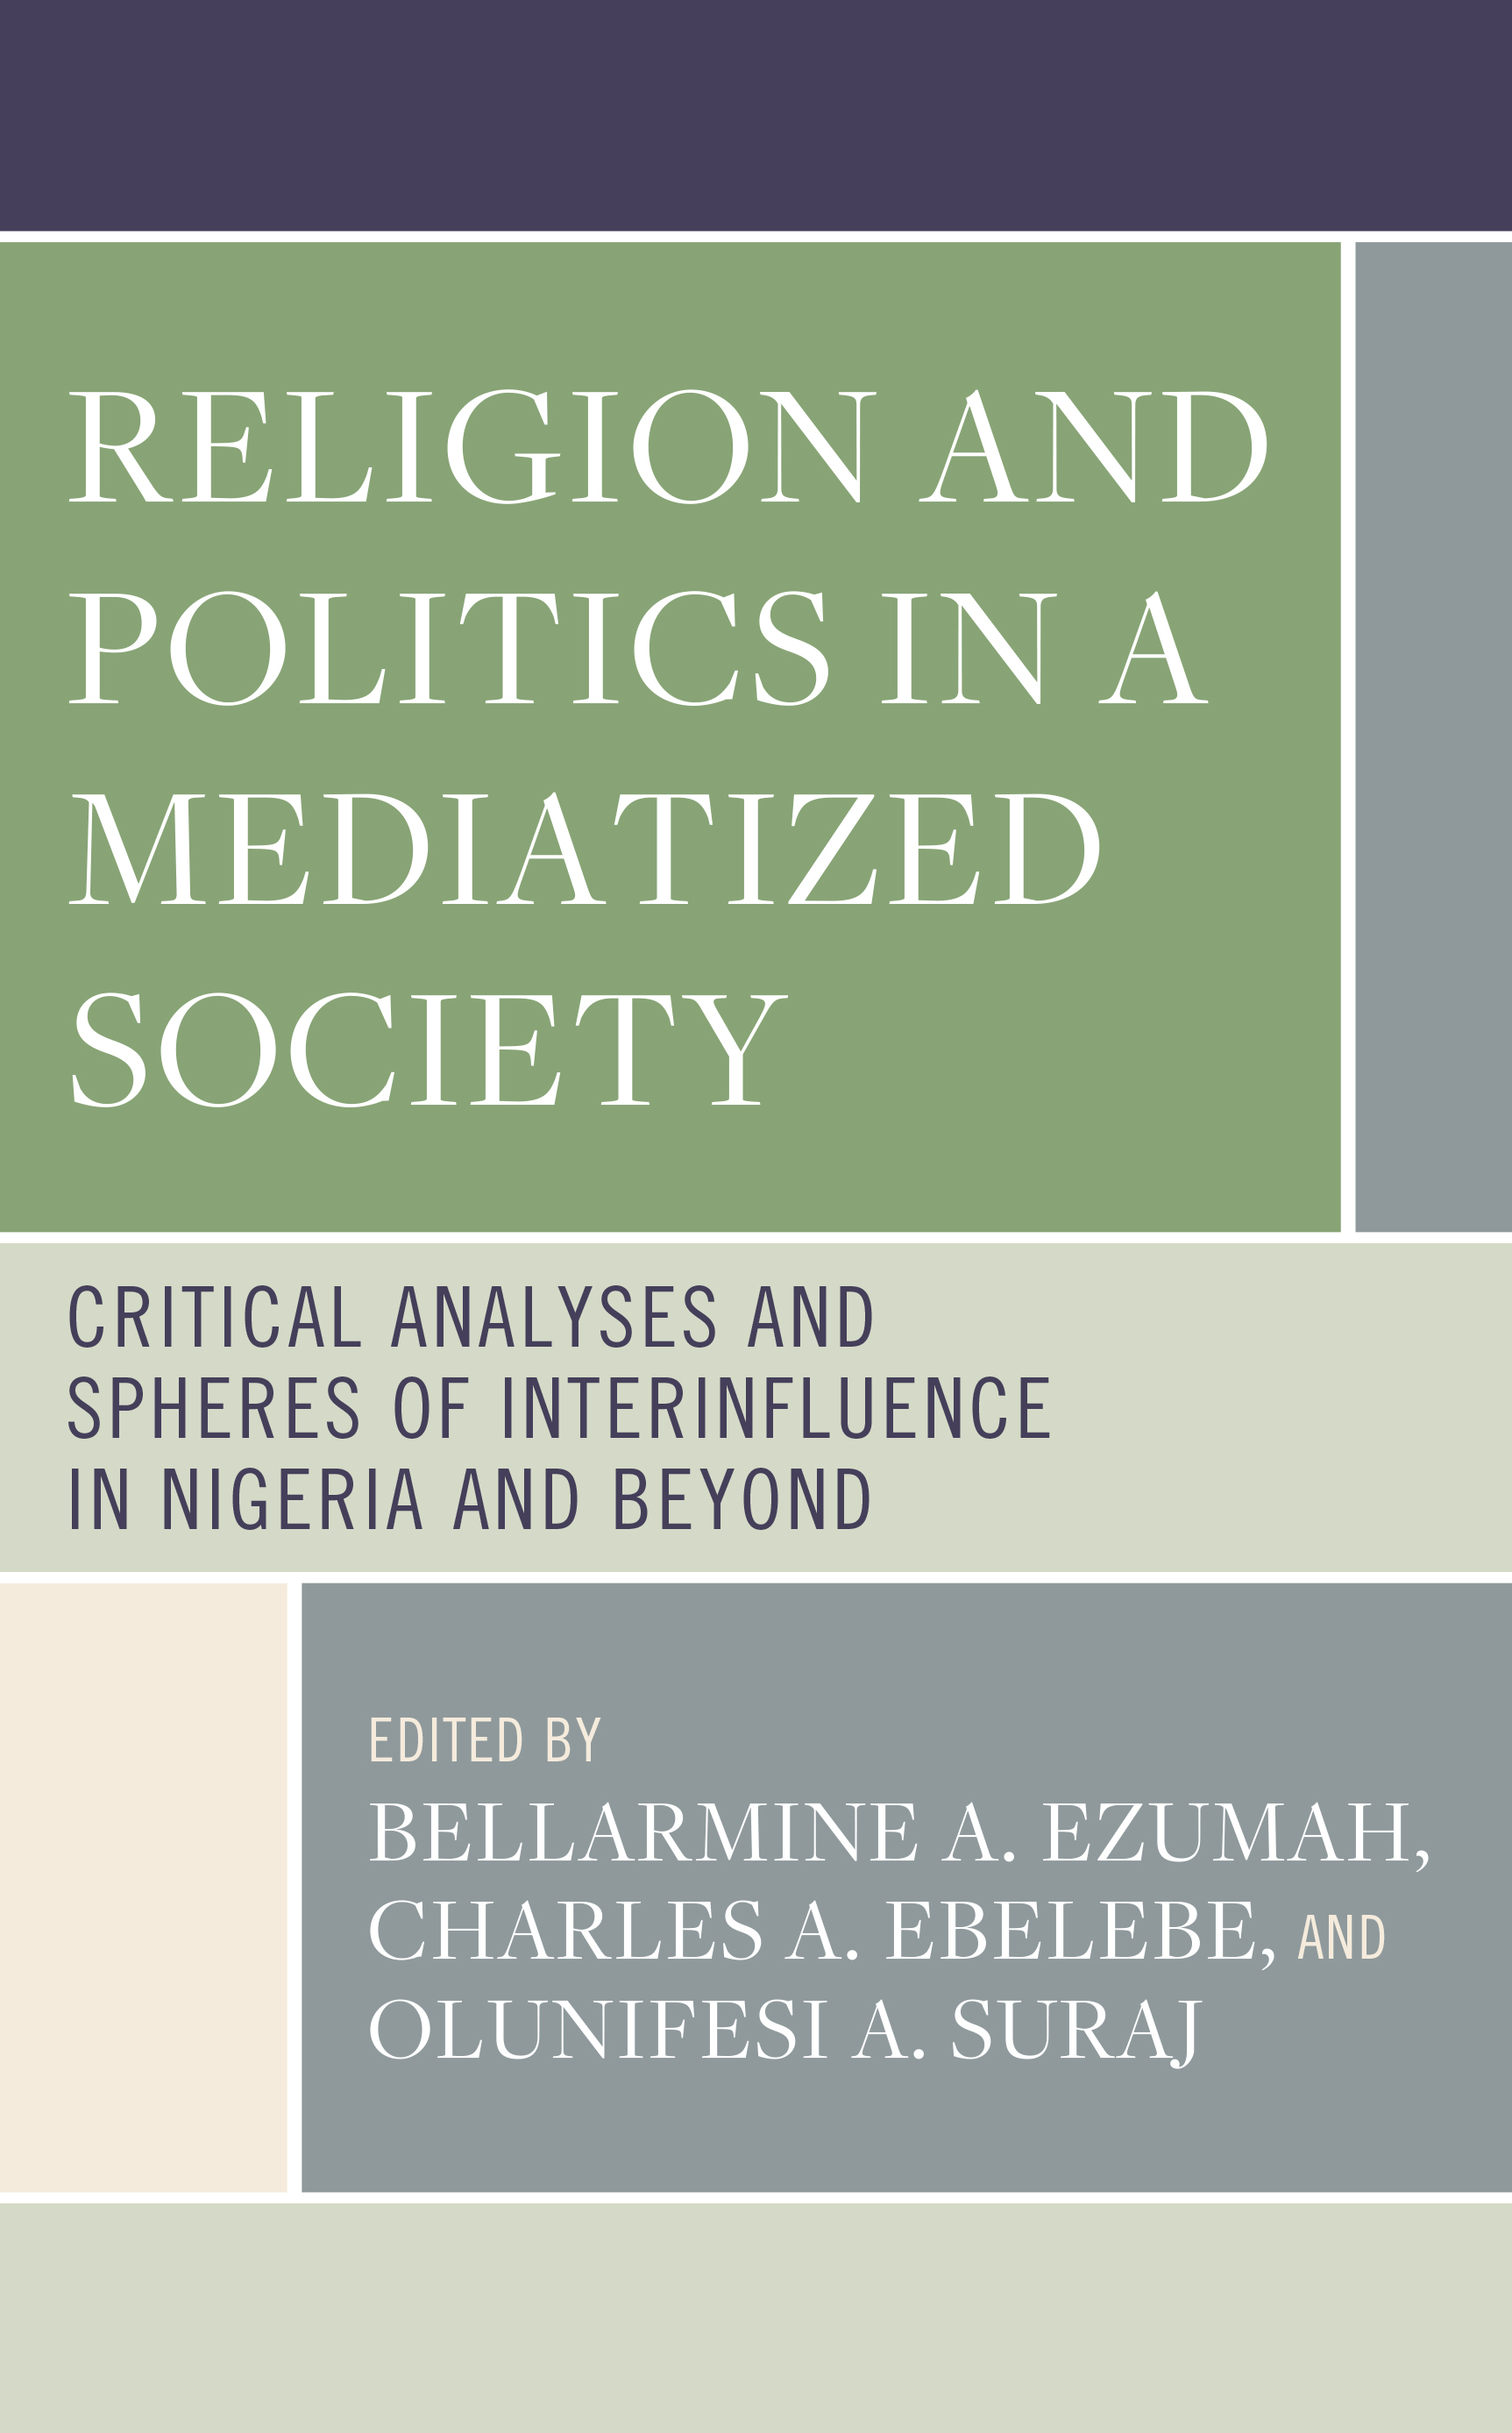 Religion and Politics in a Mediatized Society: Critical Analyses and Spheres of Interinfluence in Nigeria and Beyond